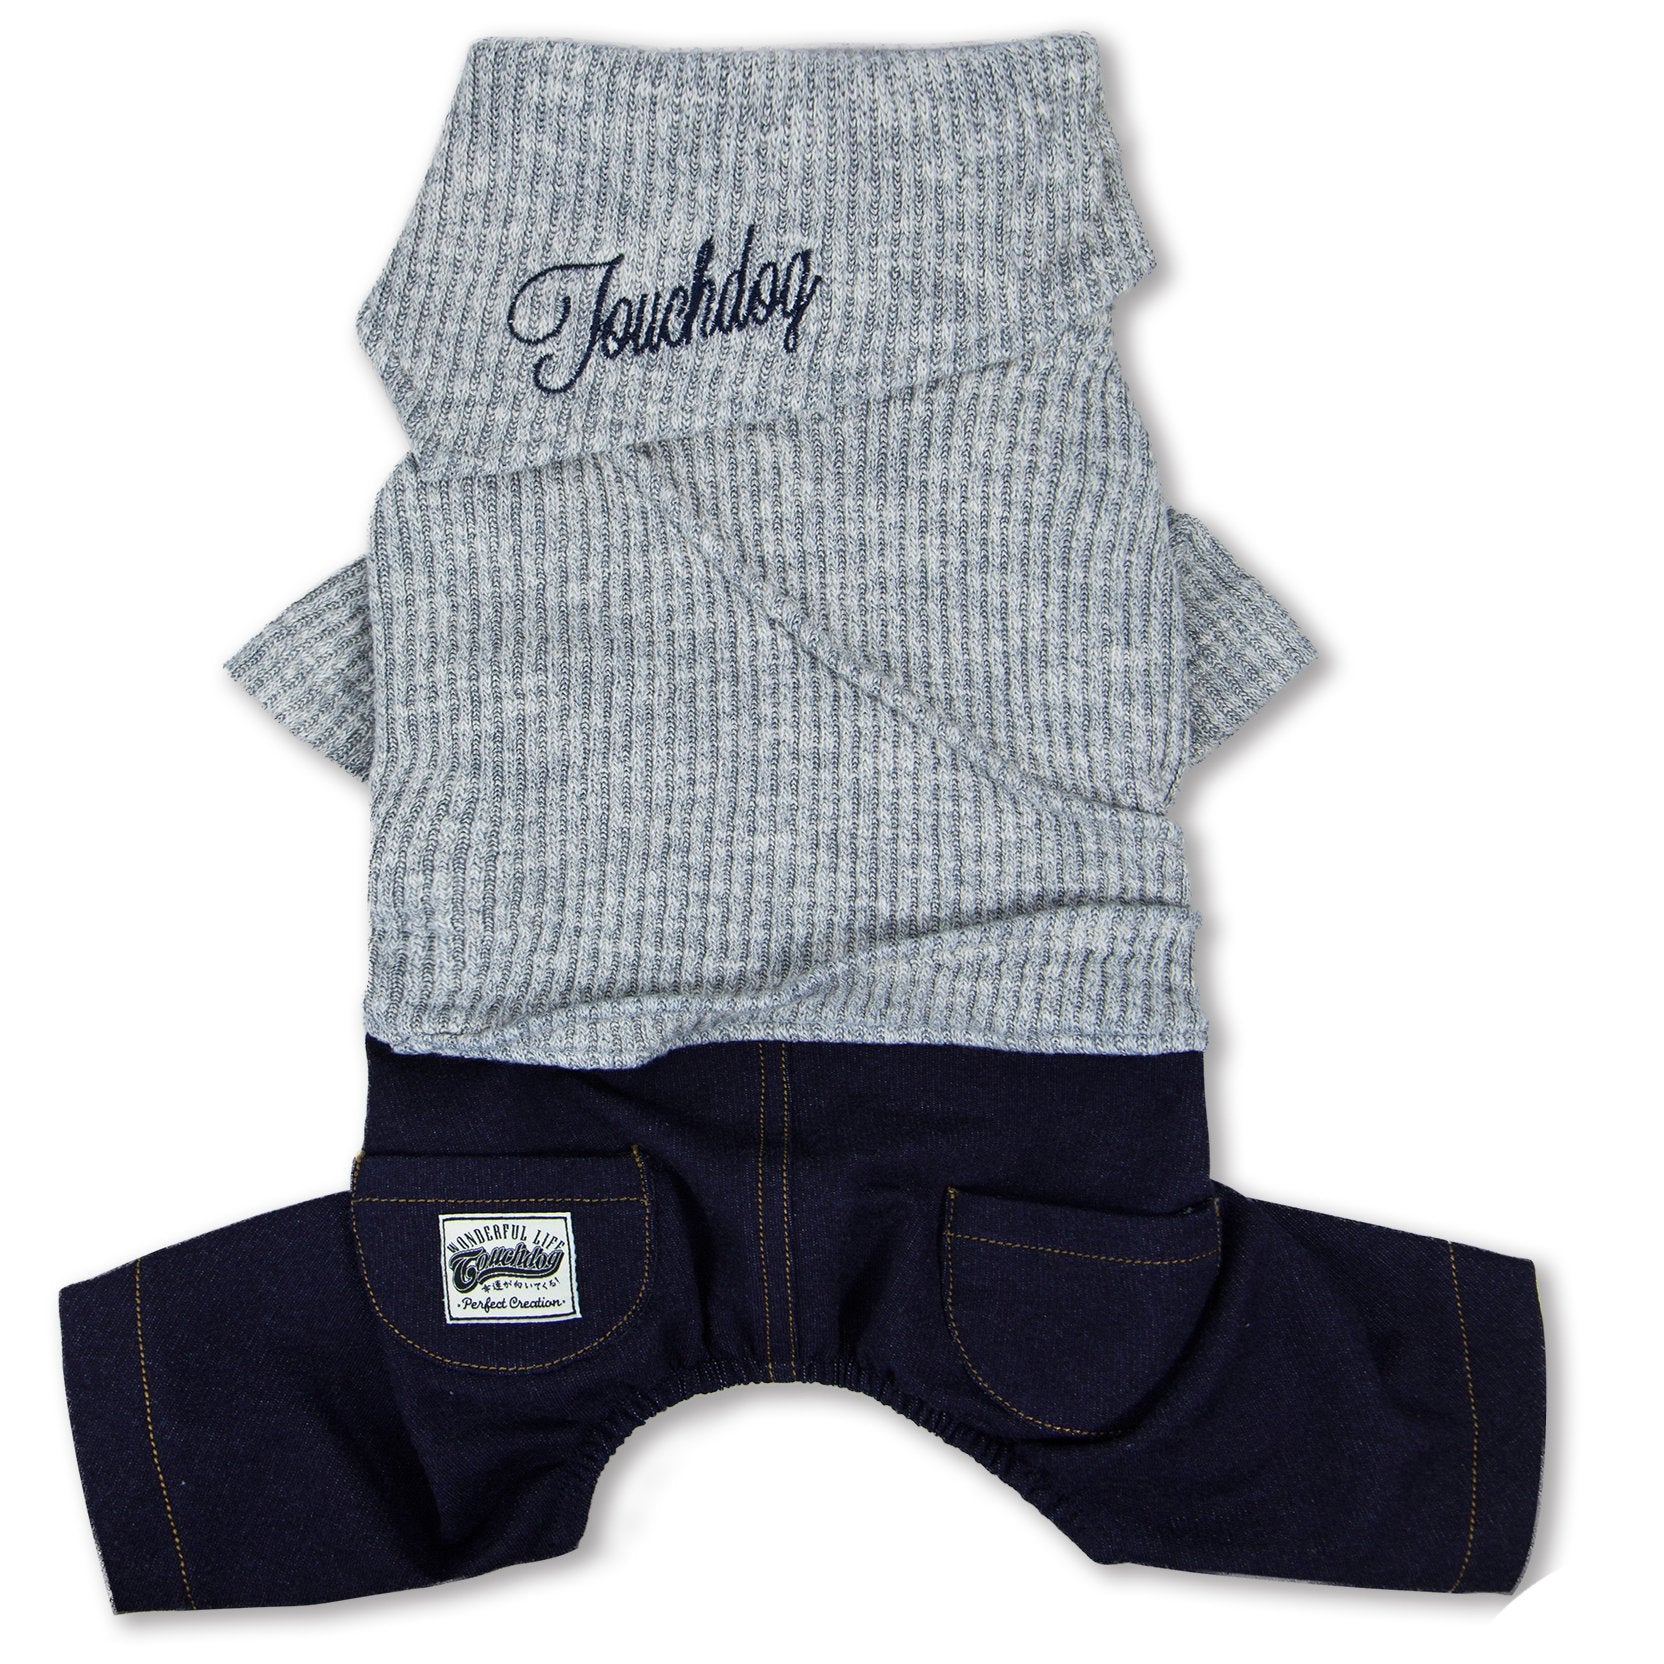 Touchdog Vogue Sweater & Denim Pant Outfit - Large - Navy